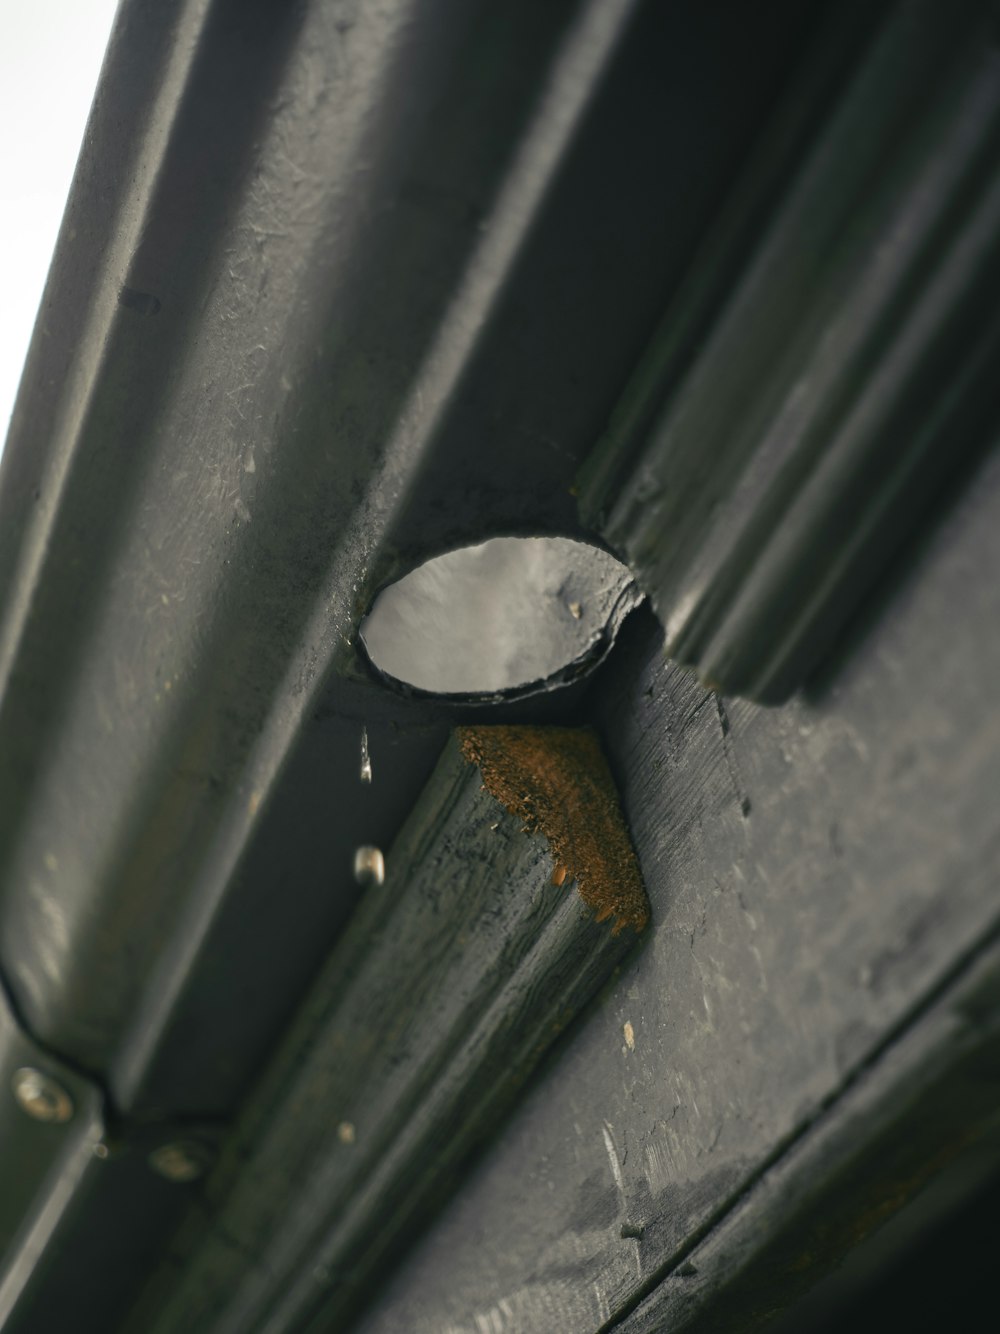 a close up of a metal object on a building